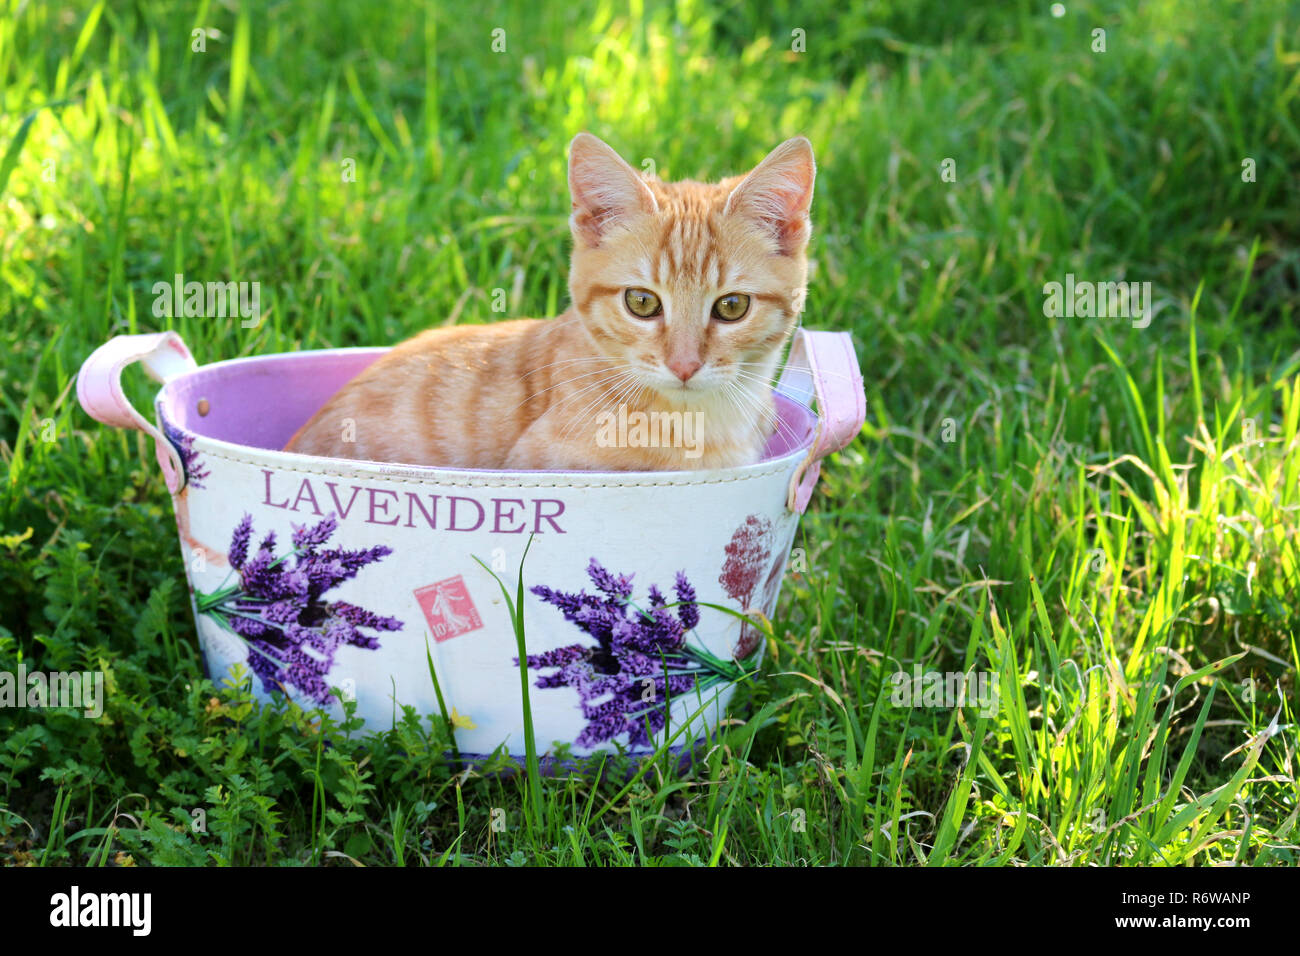 young ginger cat, 3 month old, sitting in a flower pot Stock Photo